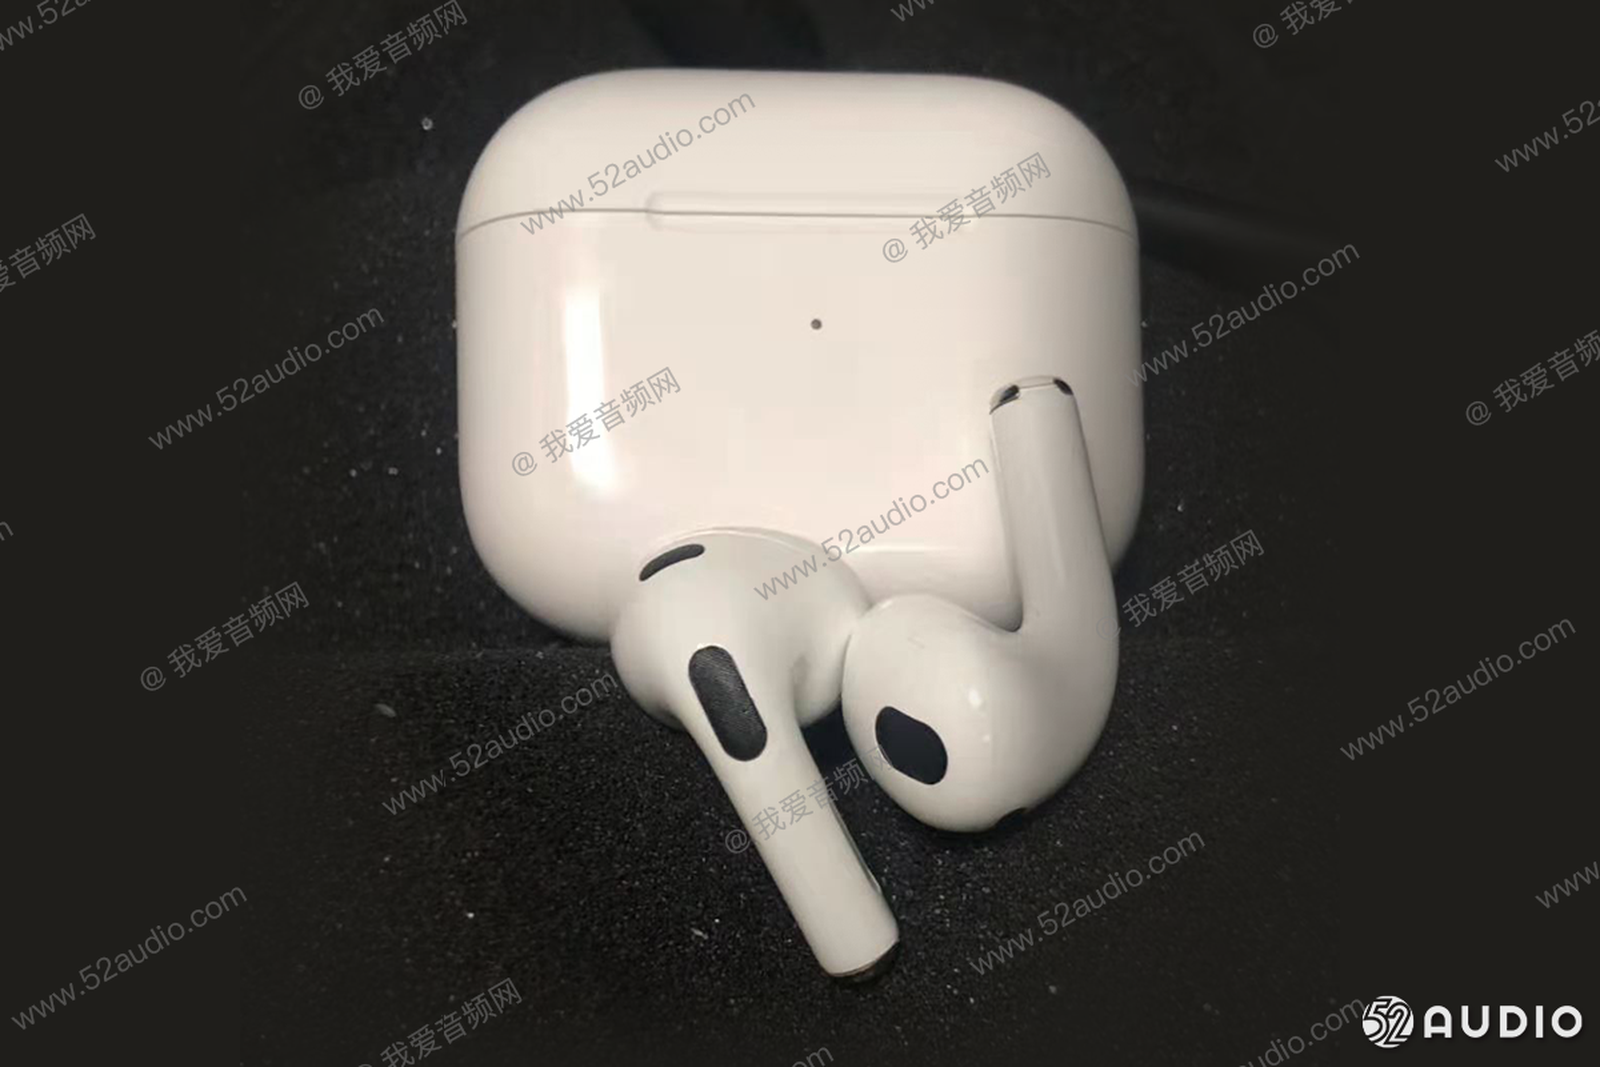 Do AirPods Work Well on Android Devices? - MacRumors